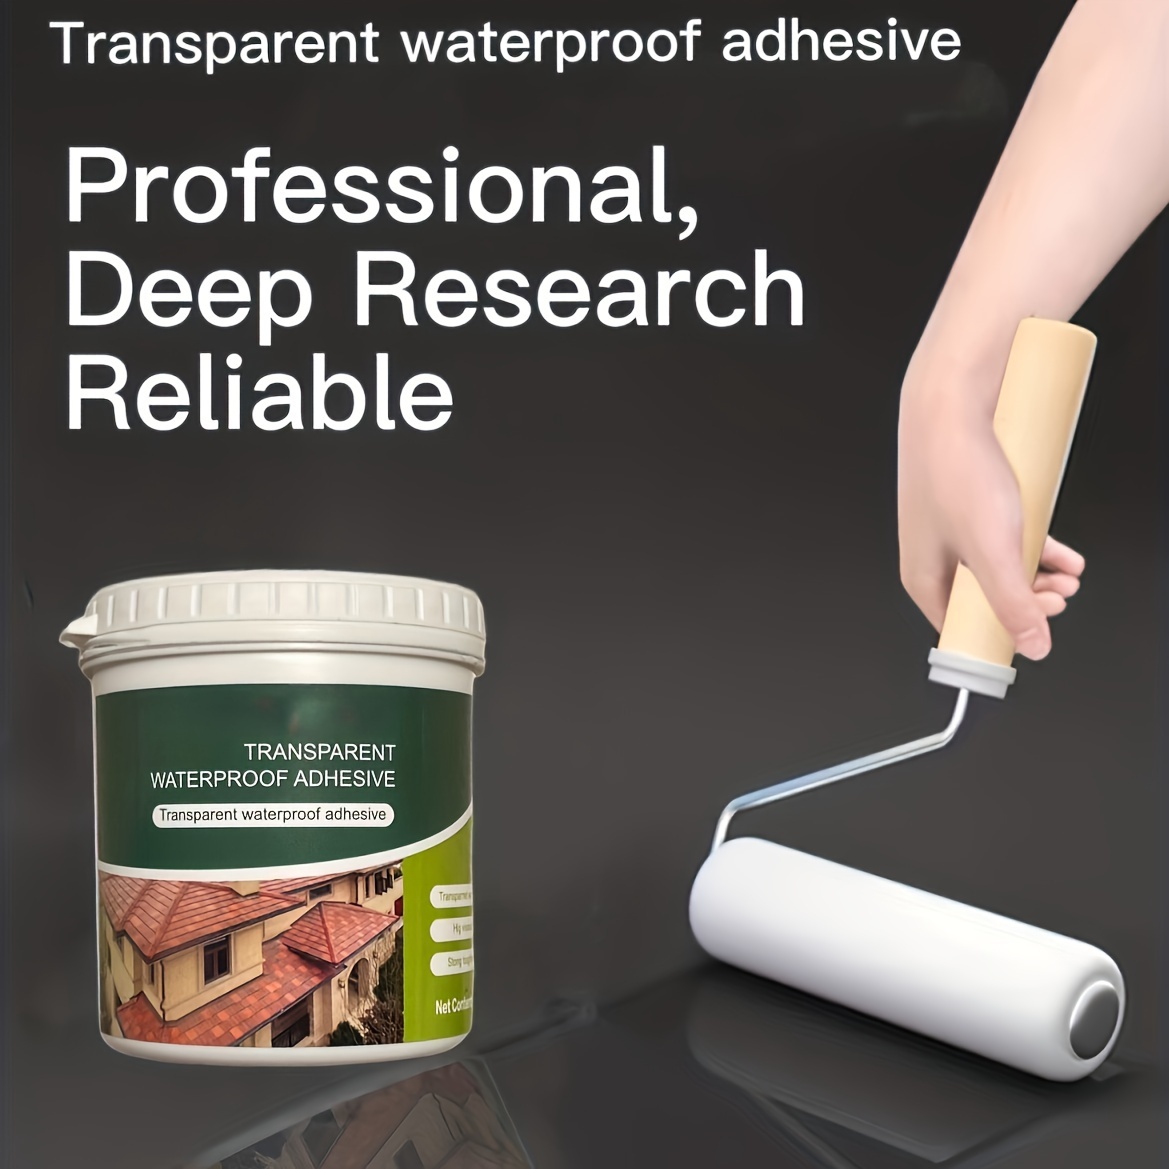 Waterproof Insulating Sealant, Invisible Waterproof Agent, Super Strong  Bonding Sealant Anti-leakage Agent